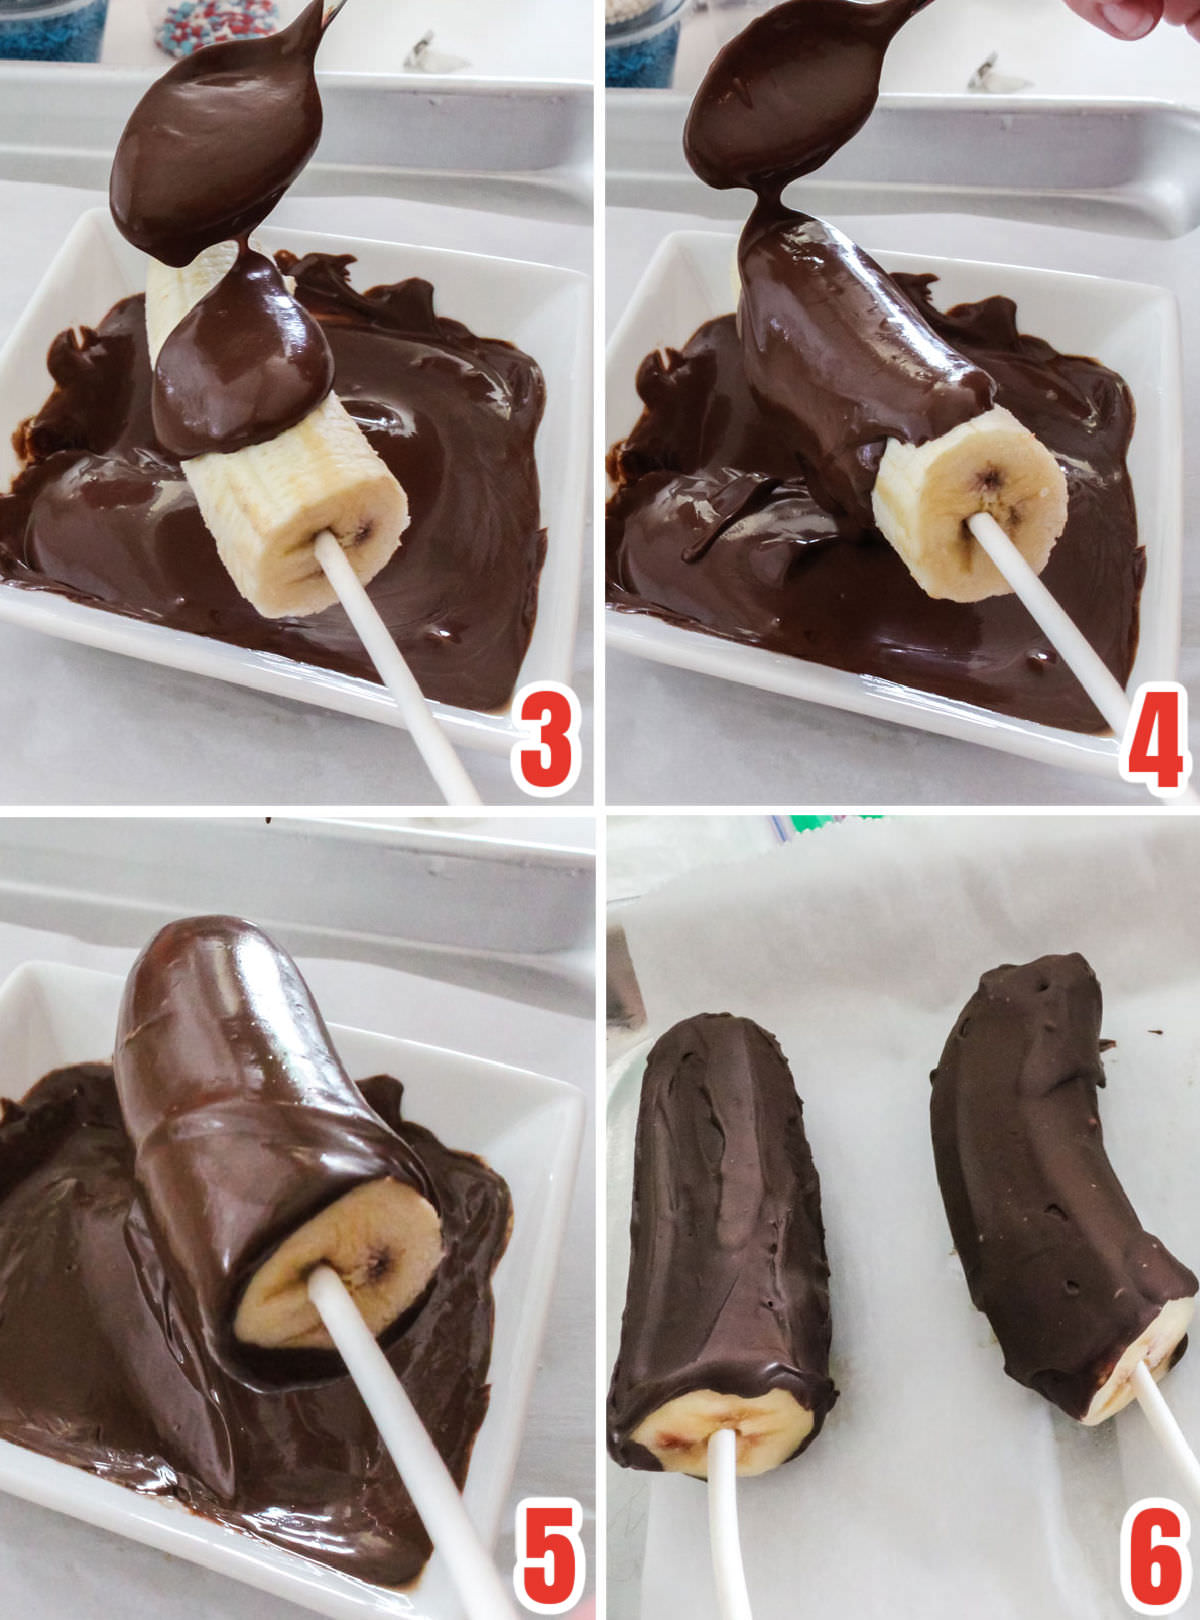 Collage image showing the steps for how to cover the Frozen Banana in chocolate.